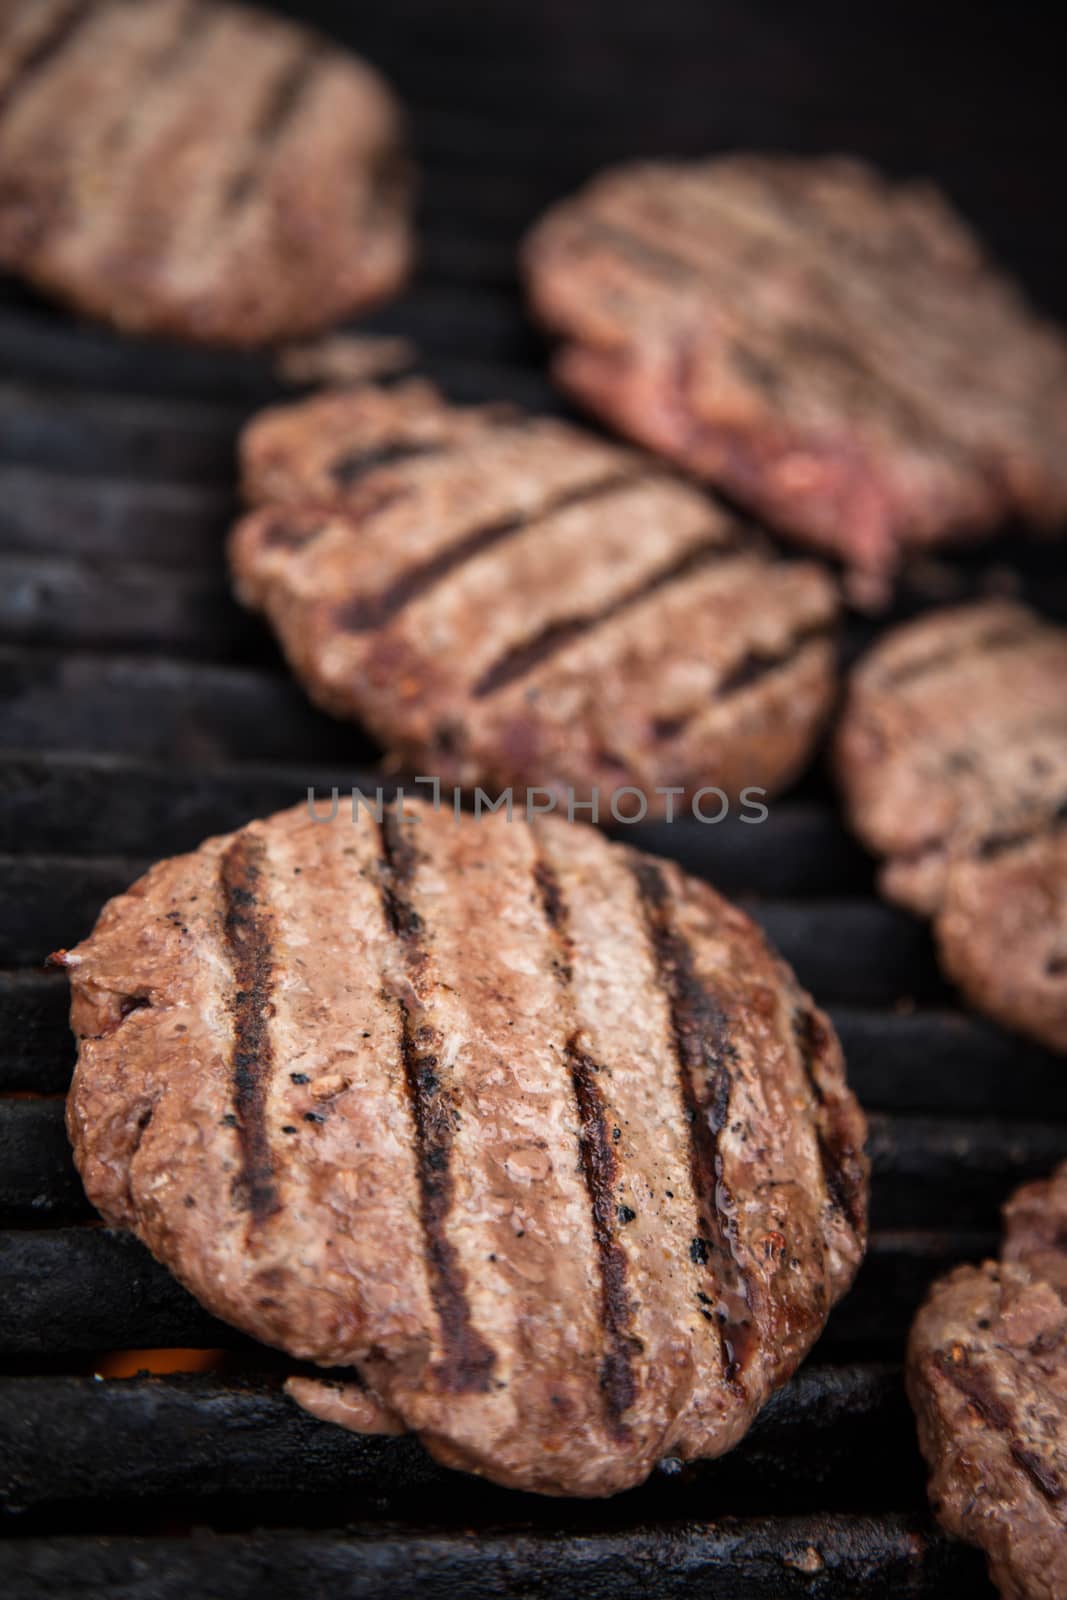 Hamburgers on the grill by Izaphoto